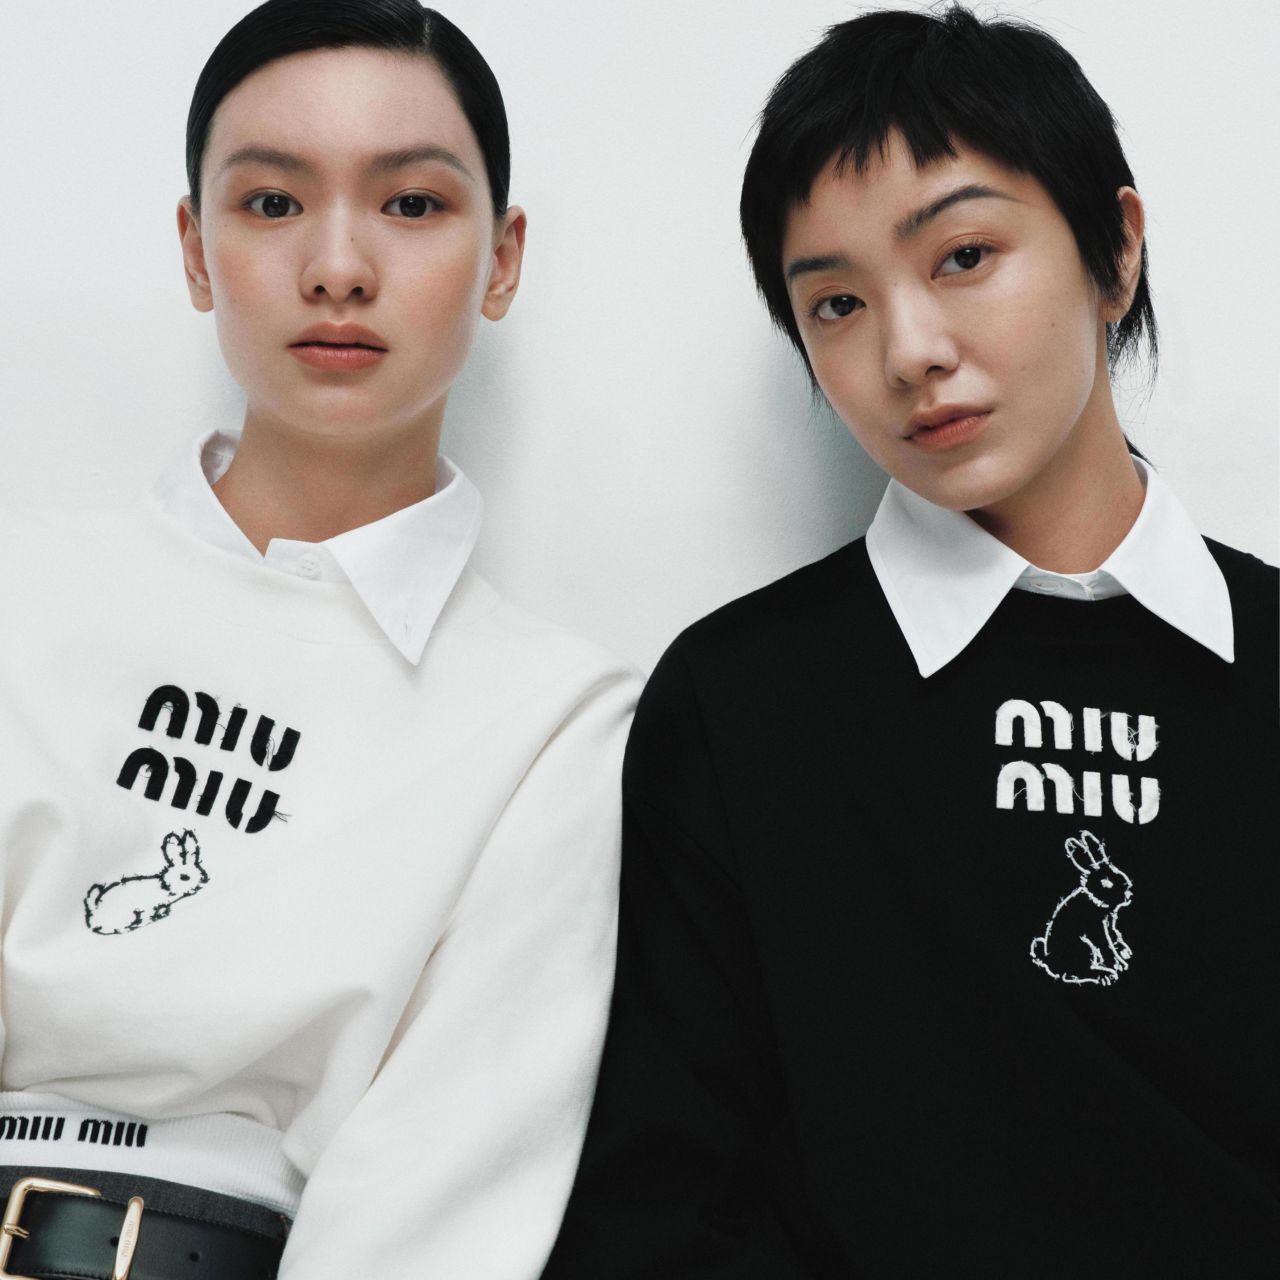 Prada's sister brand Miu Miu this year eschewed the traditional red, a color that has previously dominated luxury labels' Lunar New Year campaigns.